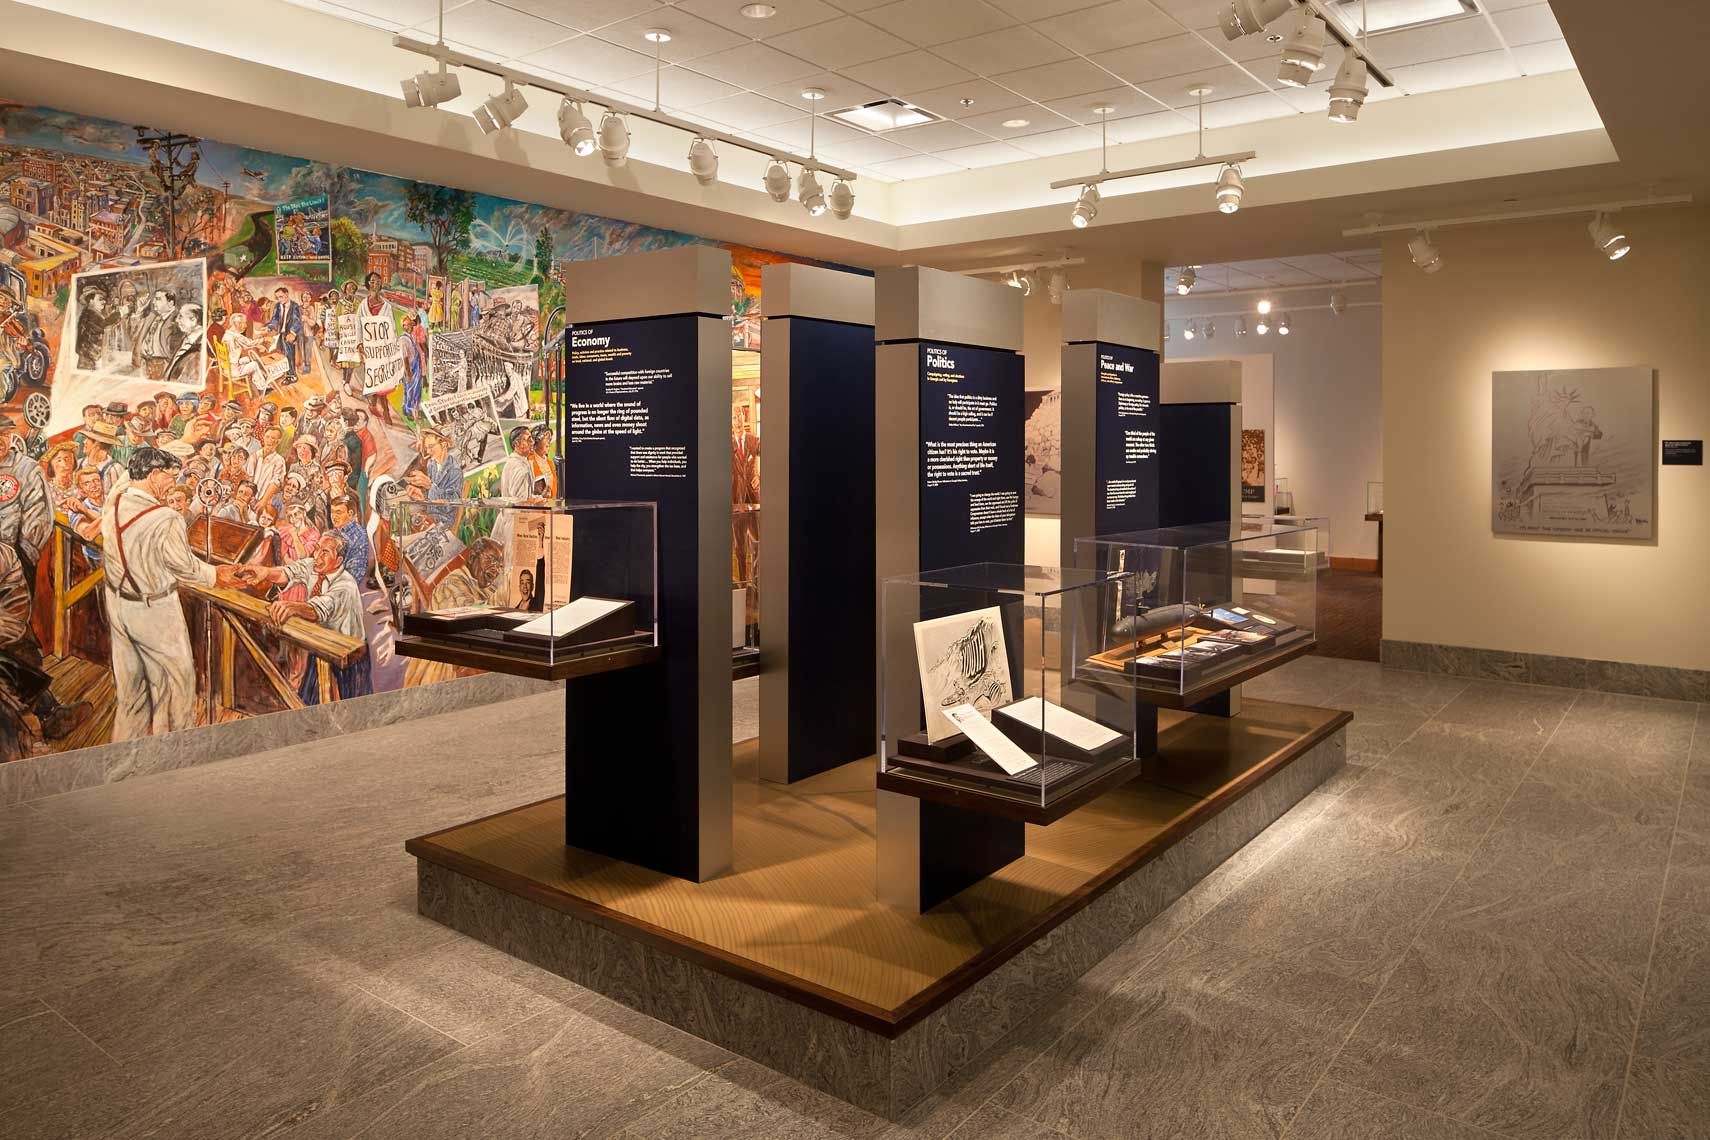 The Mural Room displays of the UGA Special Collections Library in Athens, Georgia